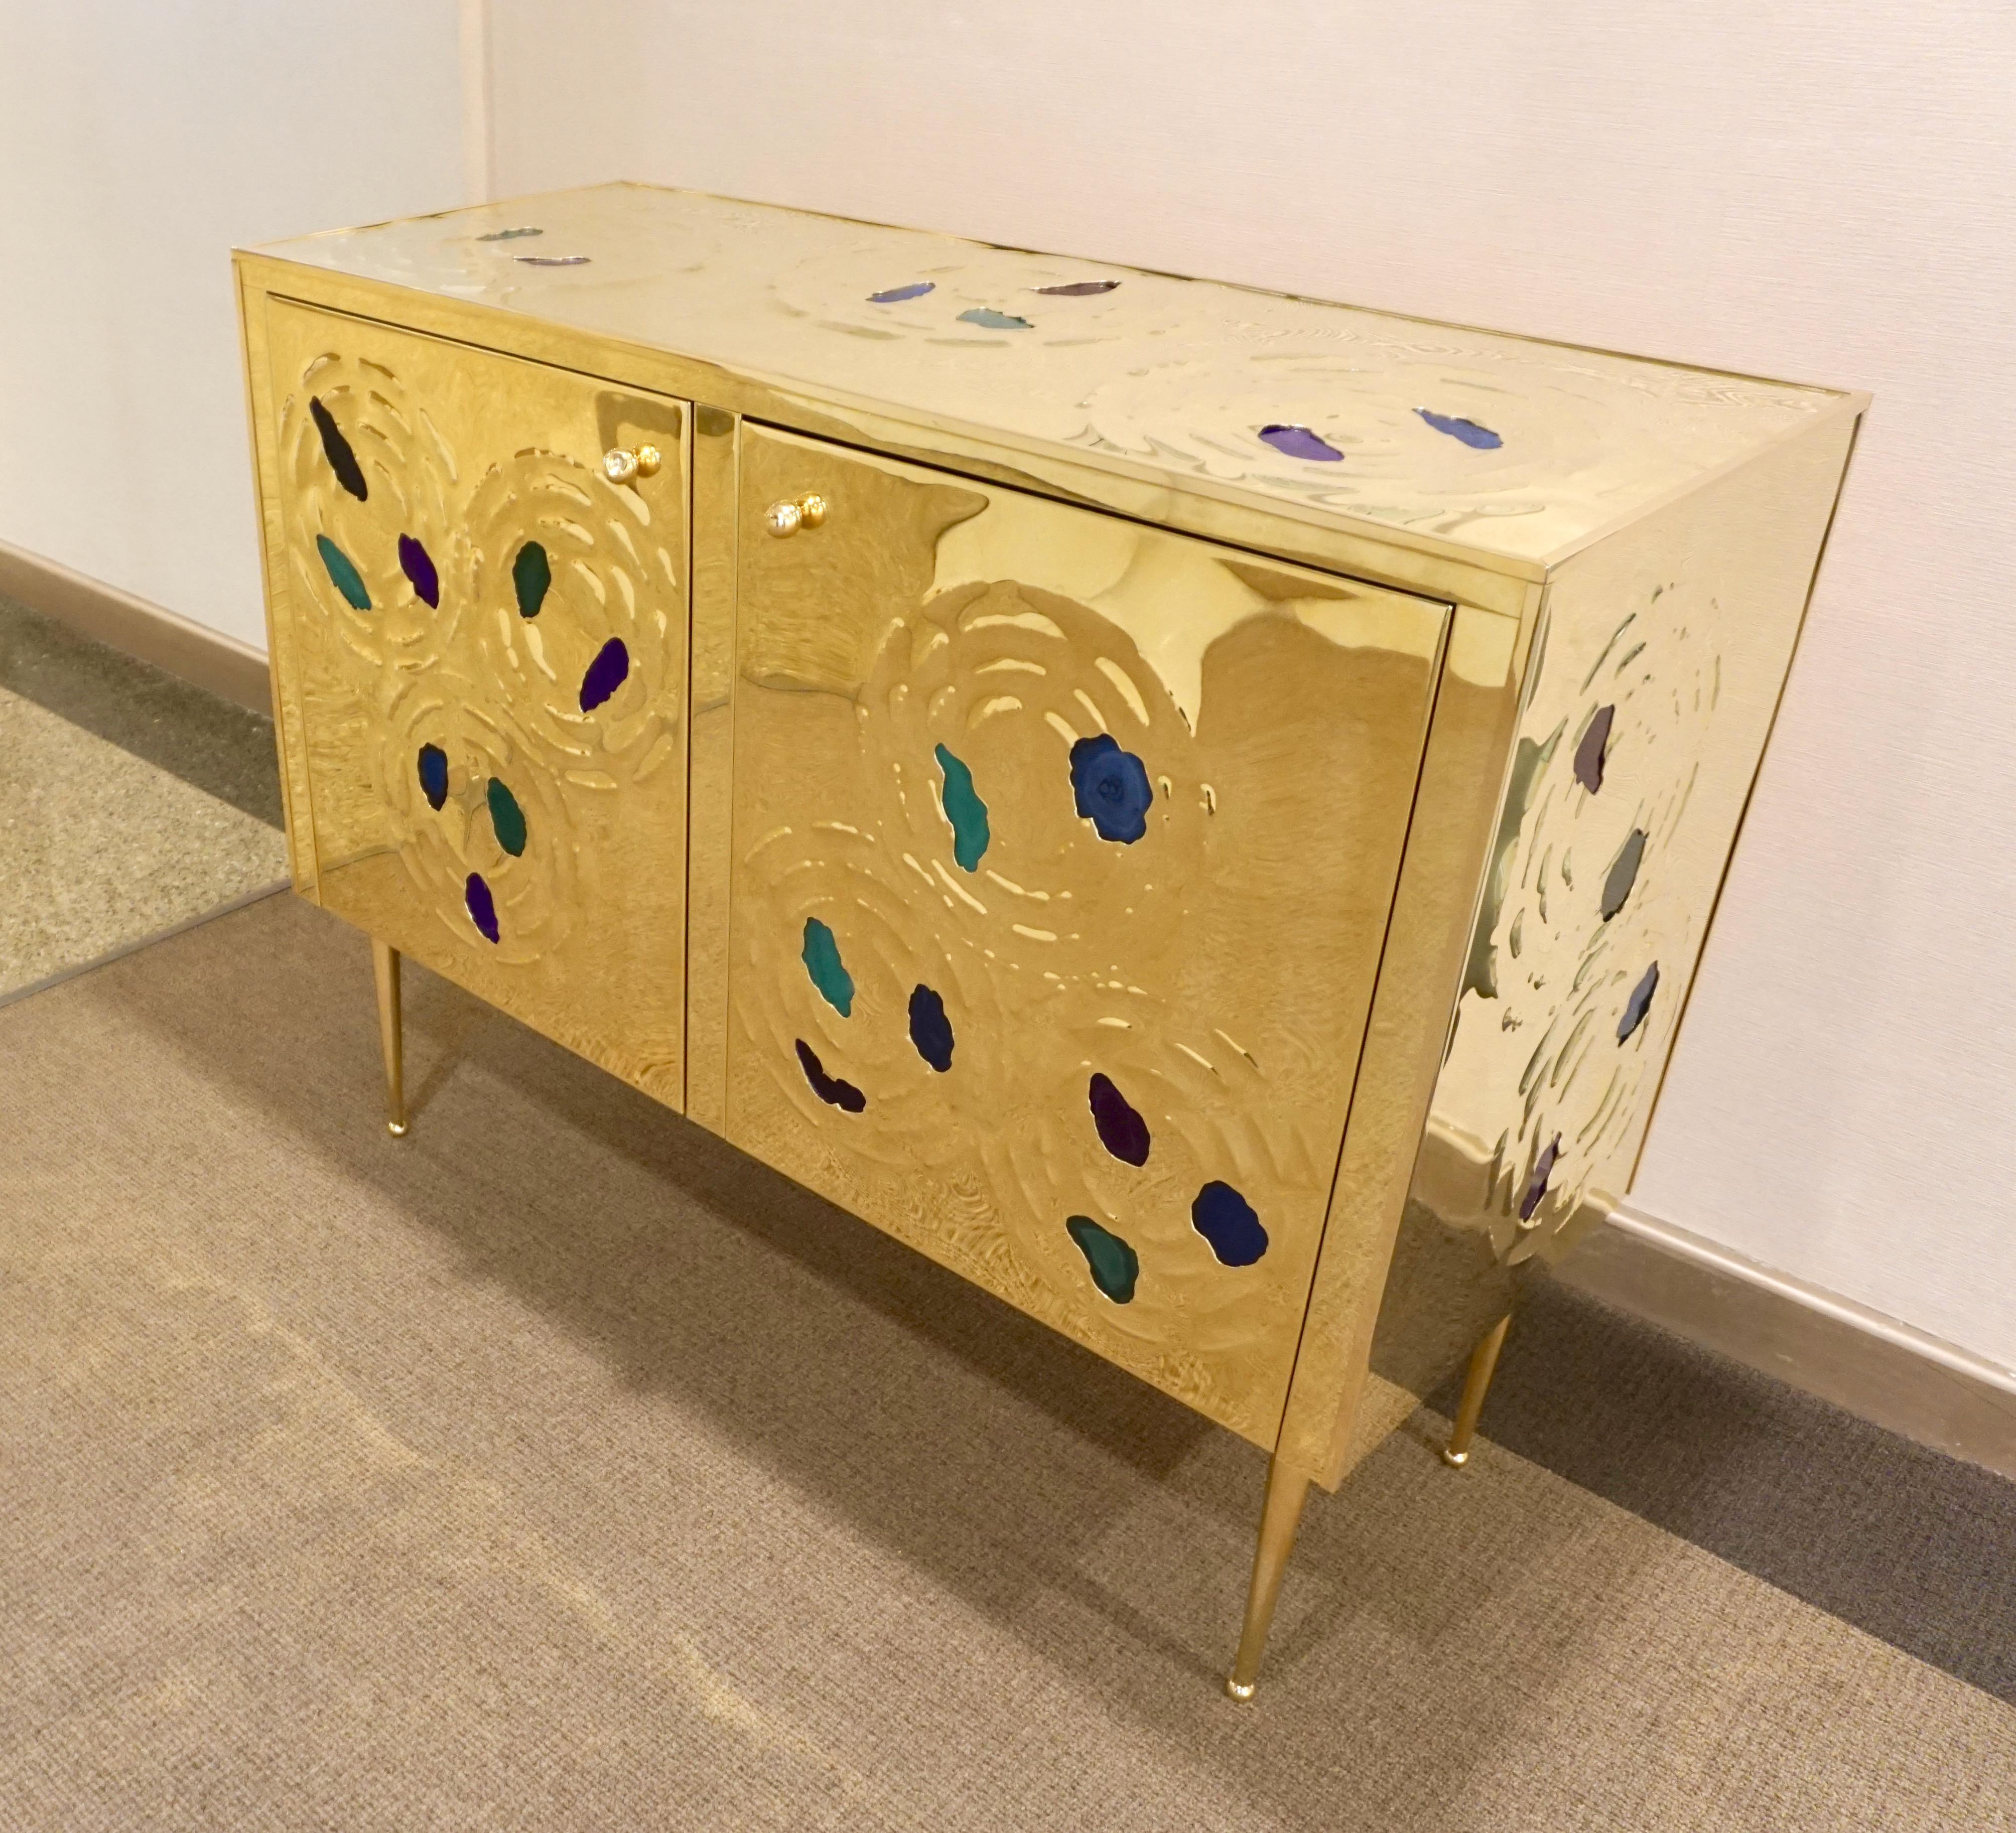 A fine design Italian credenza or sideboard with two doors, entirely handmade, wrapped in natural brass decorated with insets of cut agate in purple, blue and green. The stone is set like jewelry in the brass surround hammered with a sophisticated